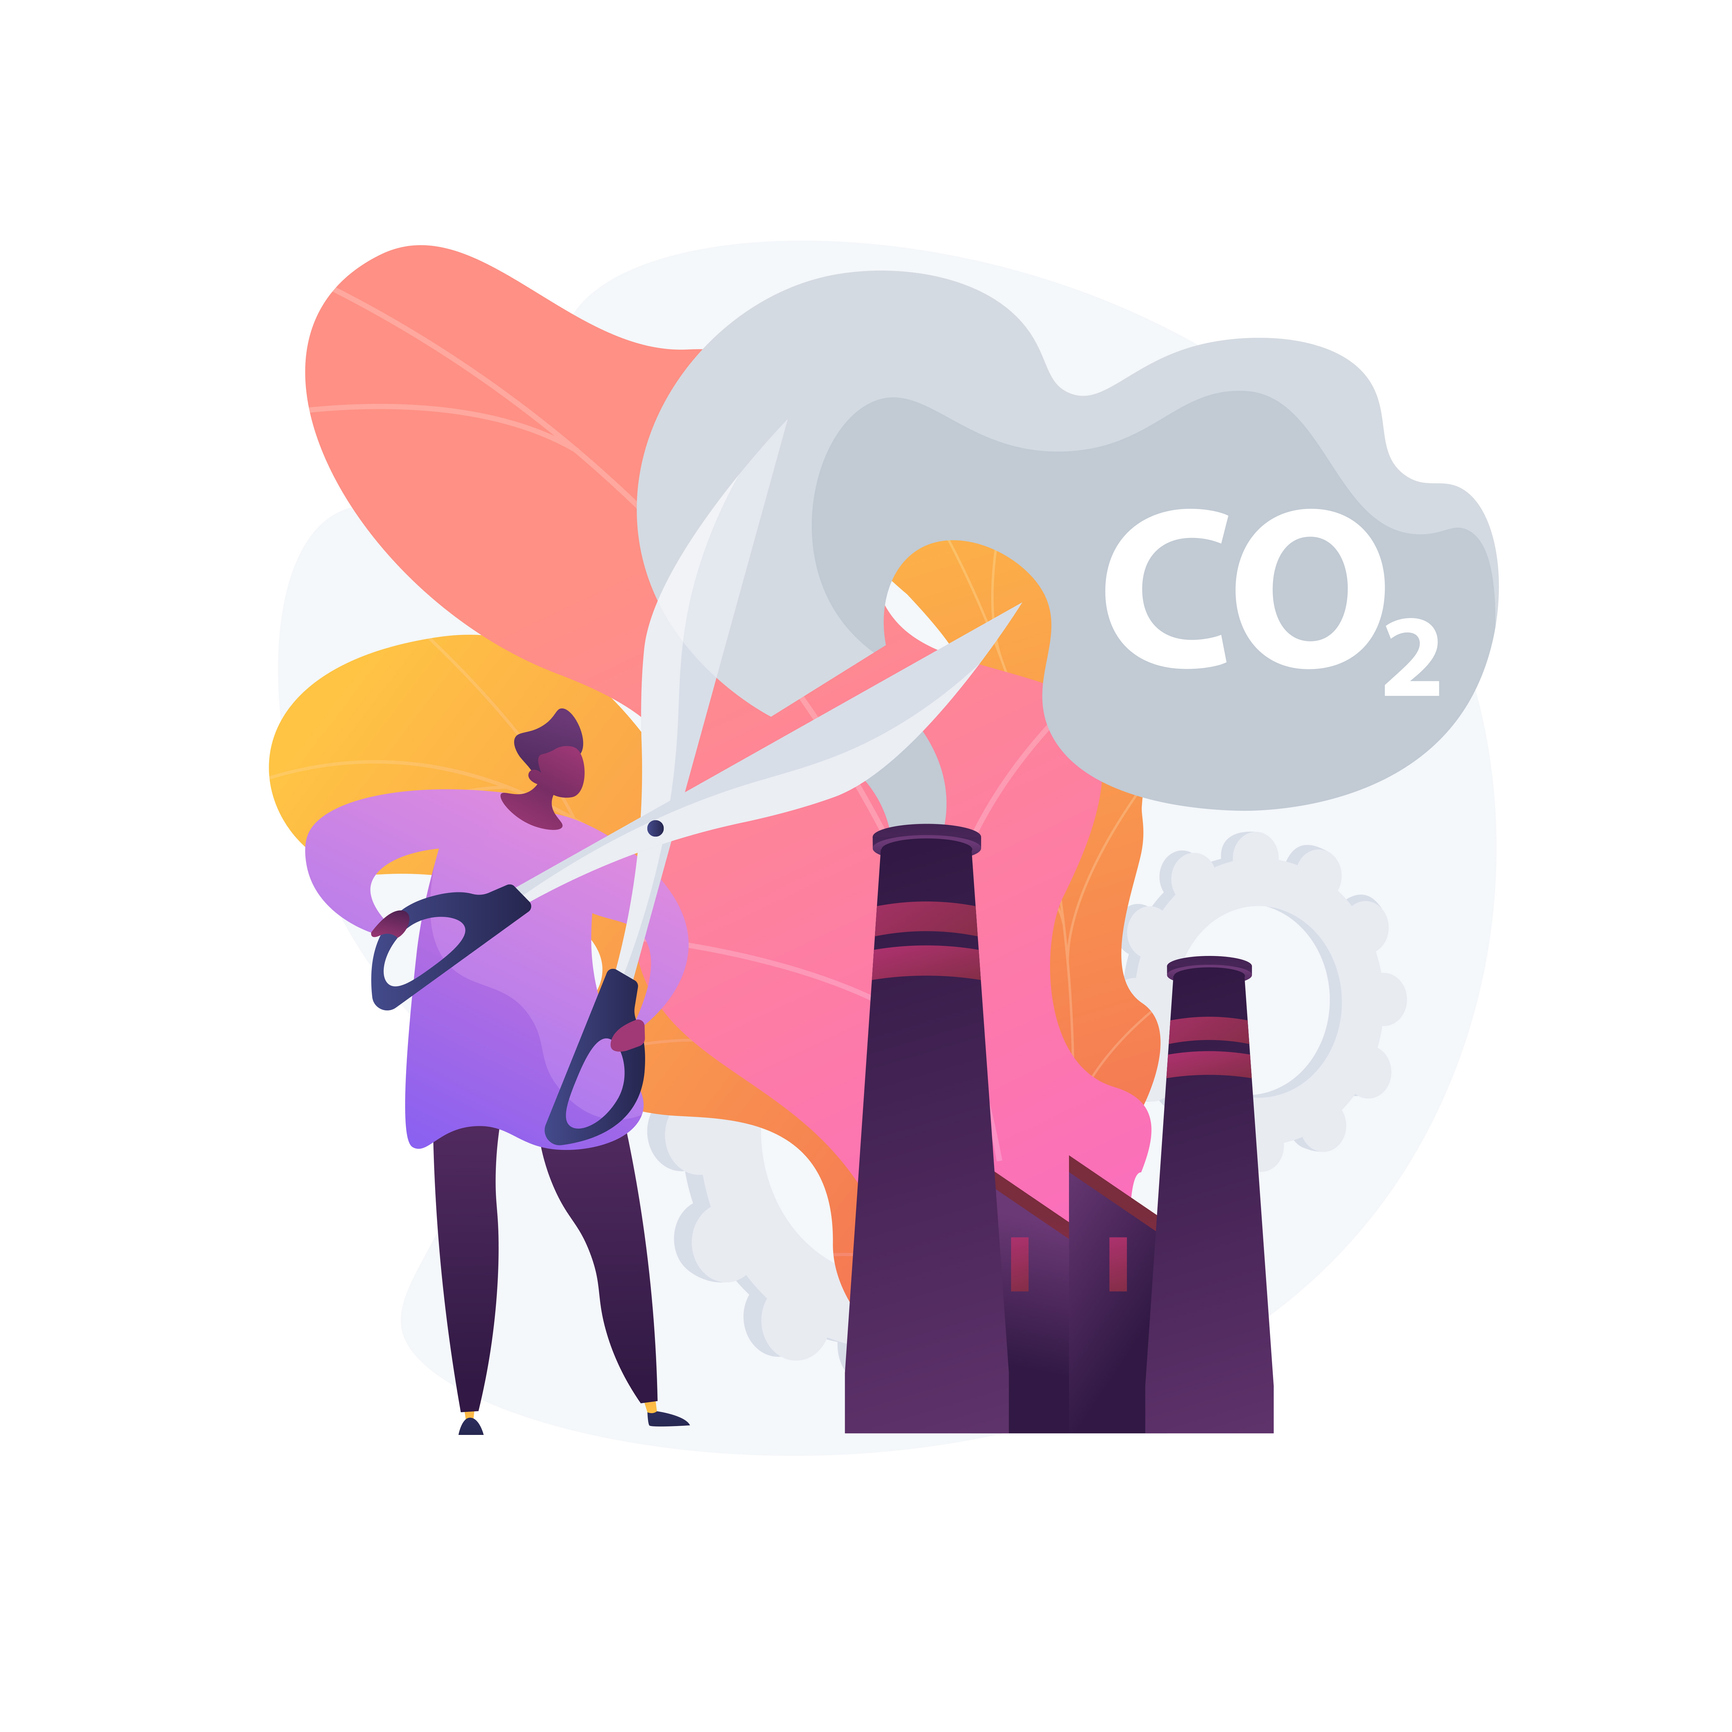 Infographic of a person cutting Co2 emissions with scissors.